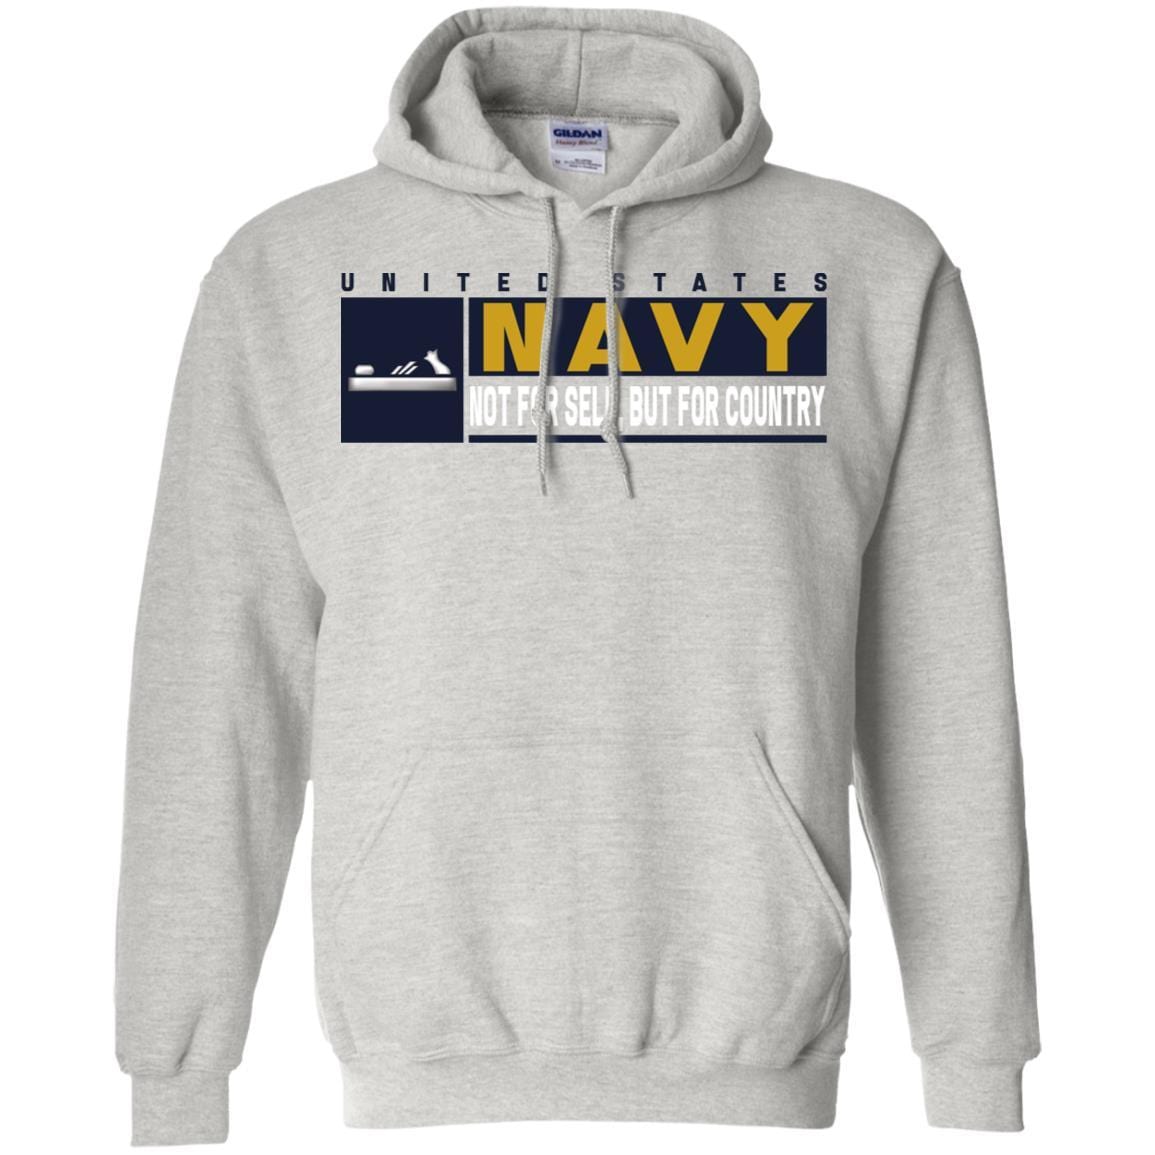 Navy Patternmaker Navy PM- Not for self Long Sleeve - Pullover Hoodie-TShirt-Navy-Veterans Nation